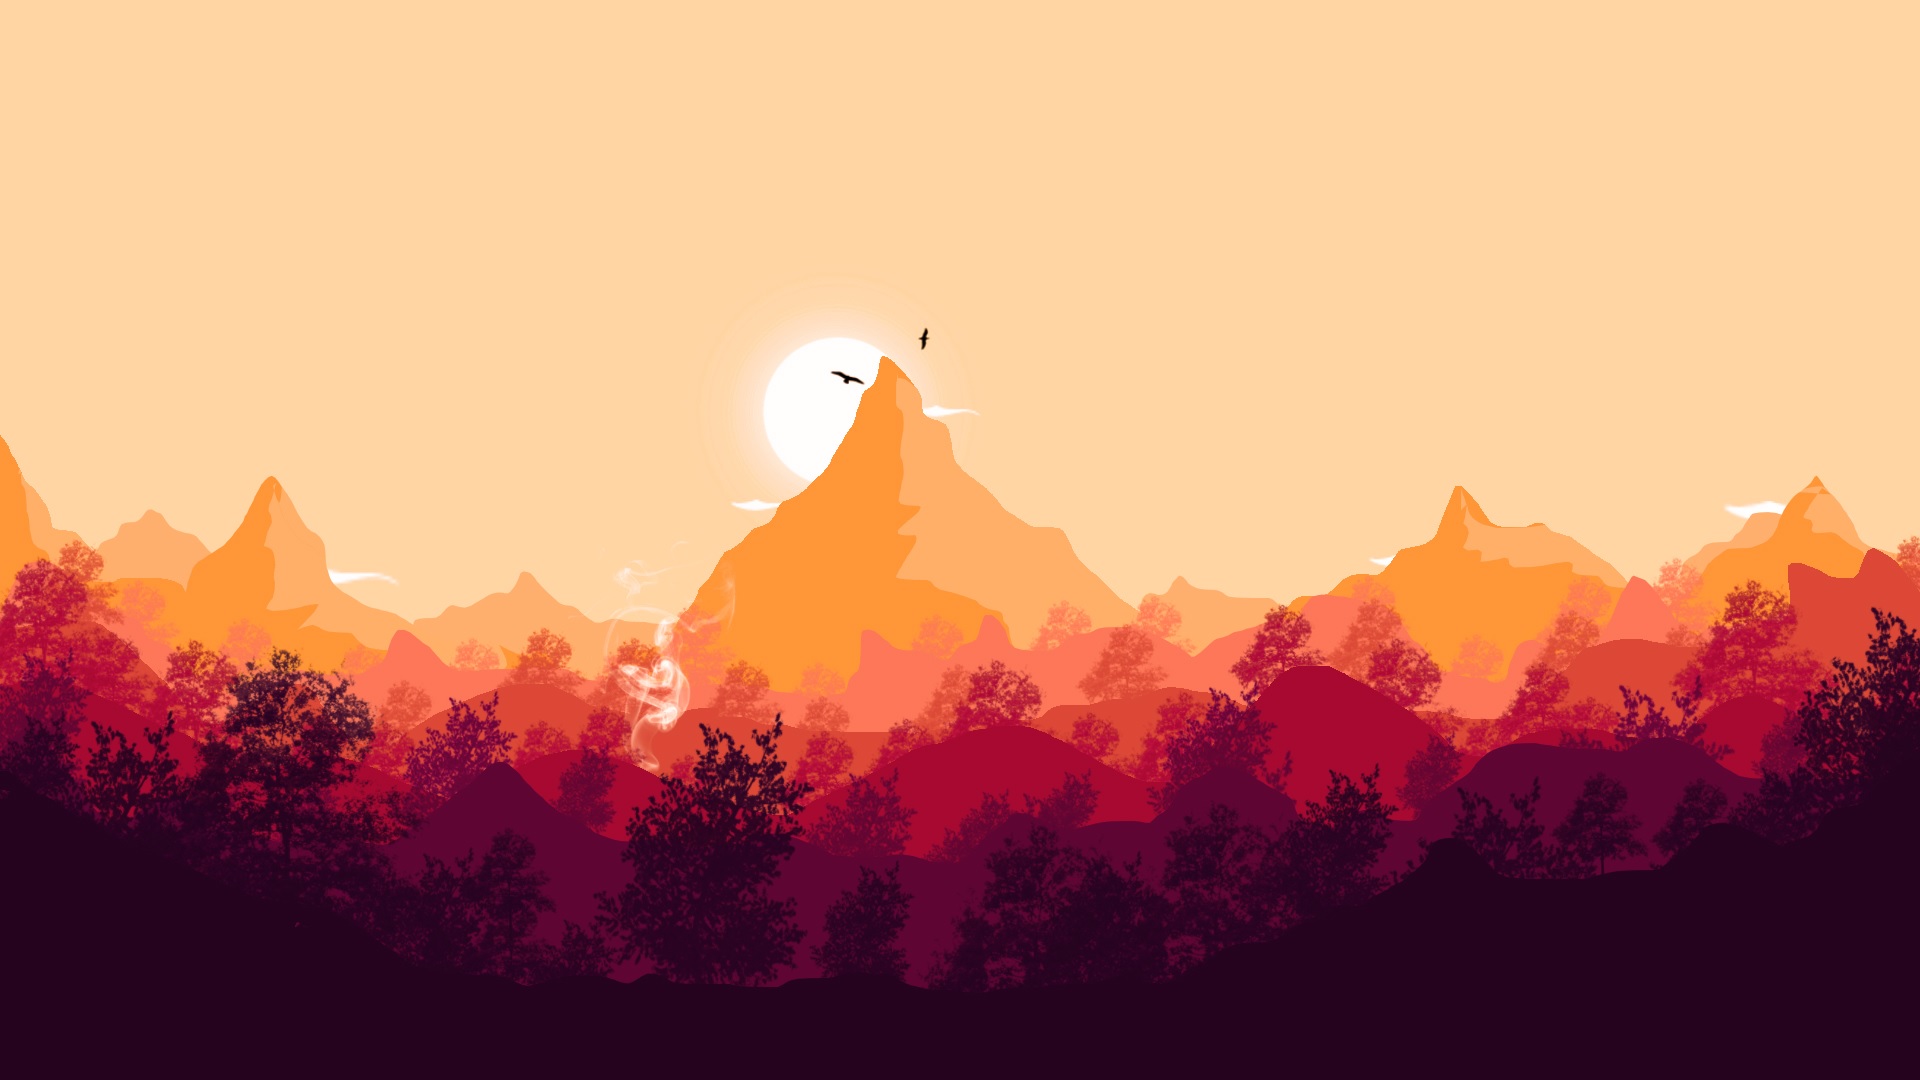 Sunset near mountains by CaptainBlend